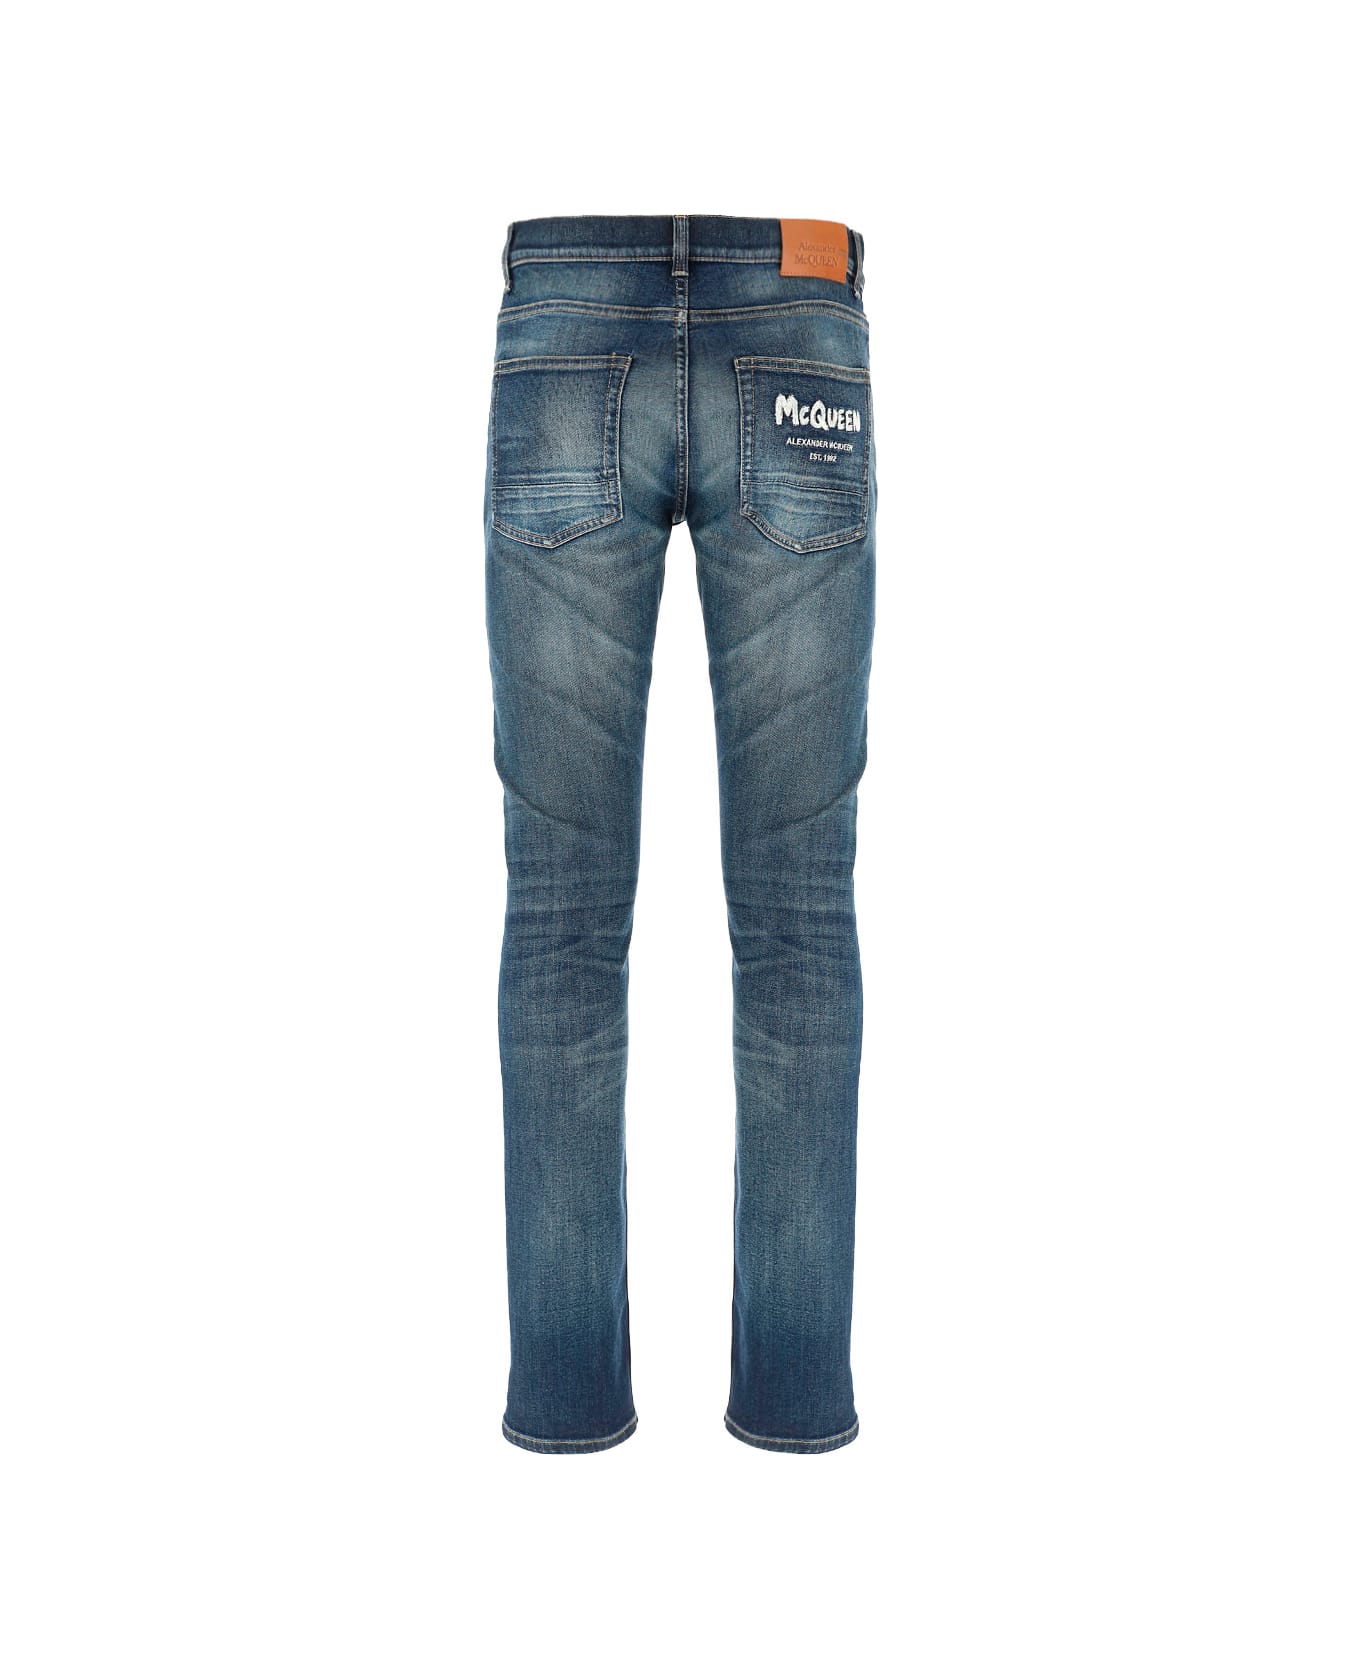 Alexander McQueen Logo Patched 5 Pockets Jeans - Blue Washed デニム